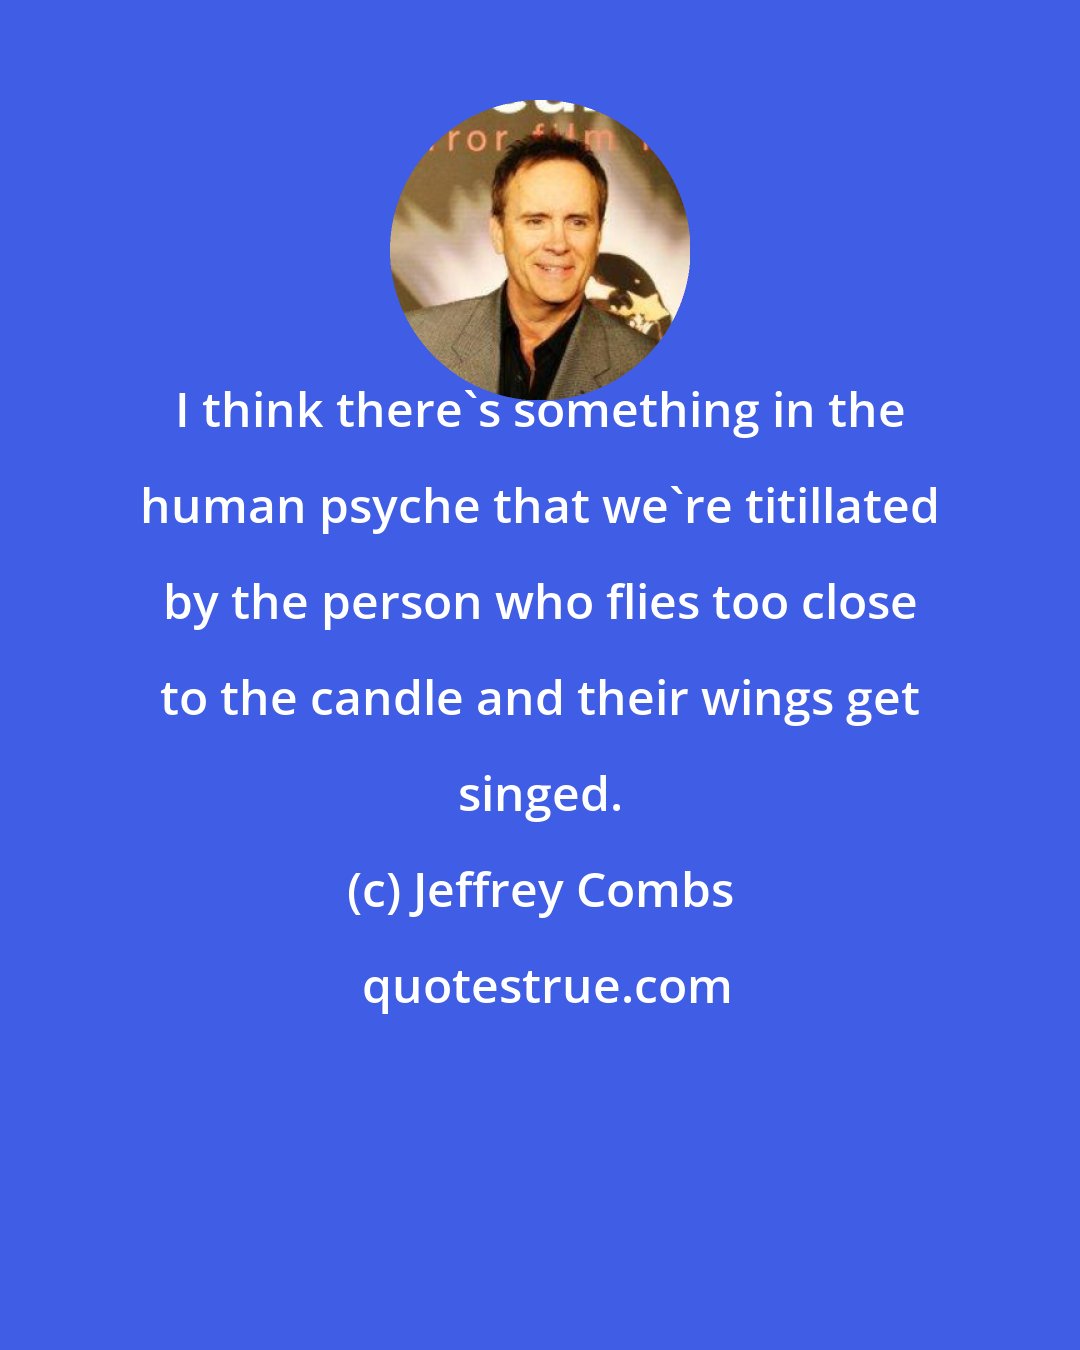 Jeffrey Combs: I think there's something in the human psyche that we're titillated by the person who flies too close to the candle and their wings get singed.